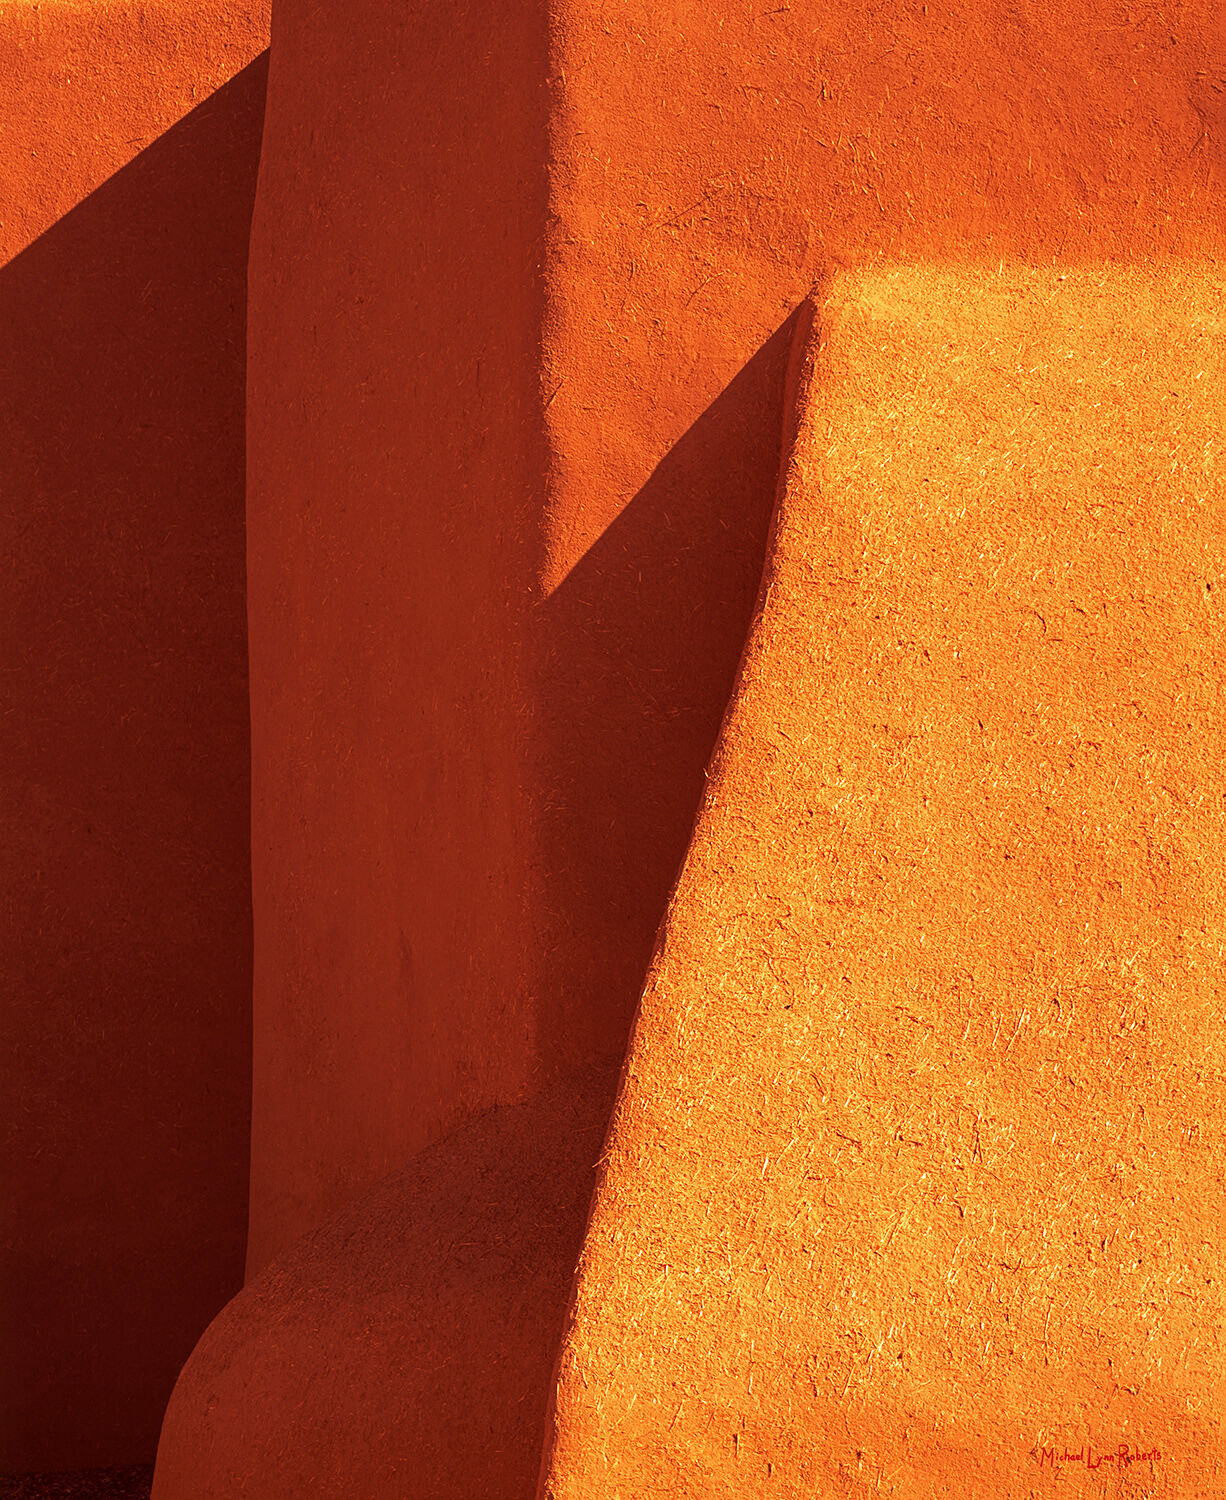 An abstract photographic closeup of light and shadow on a textured adobe wall of the St. Francis Mission in Rancho de Taos.